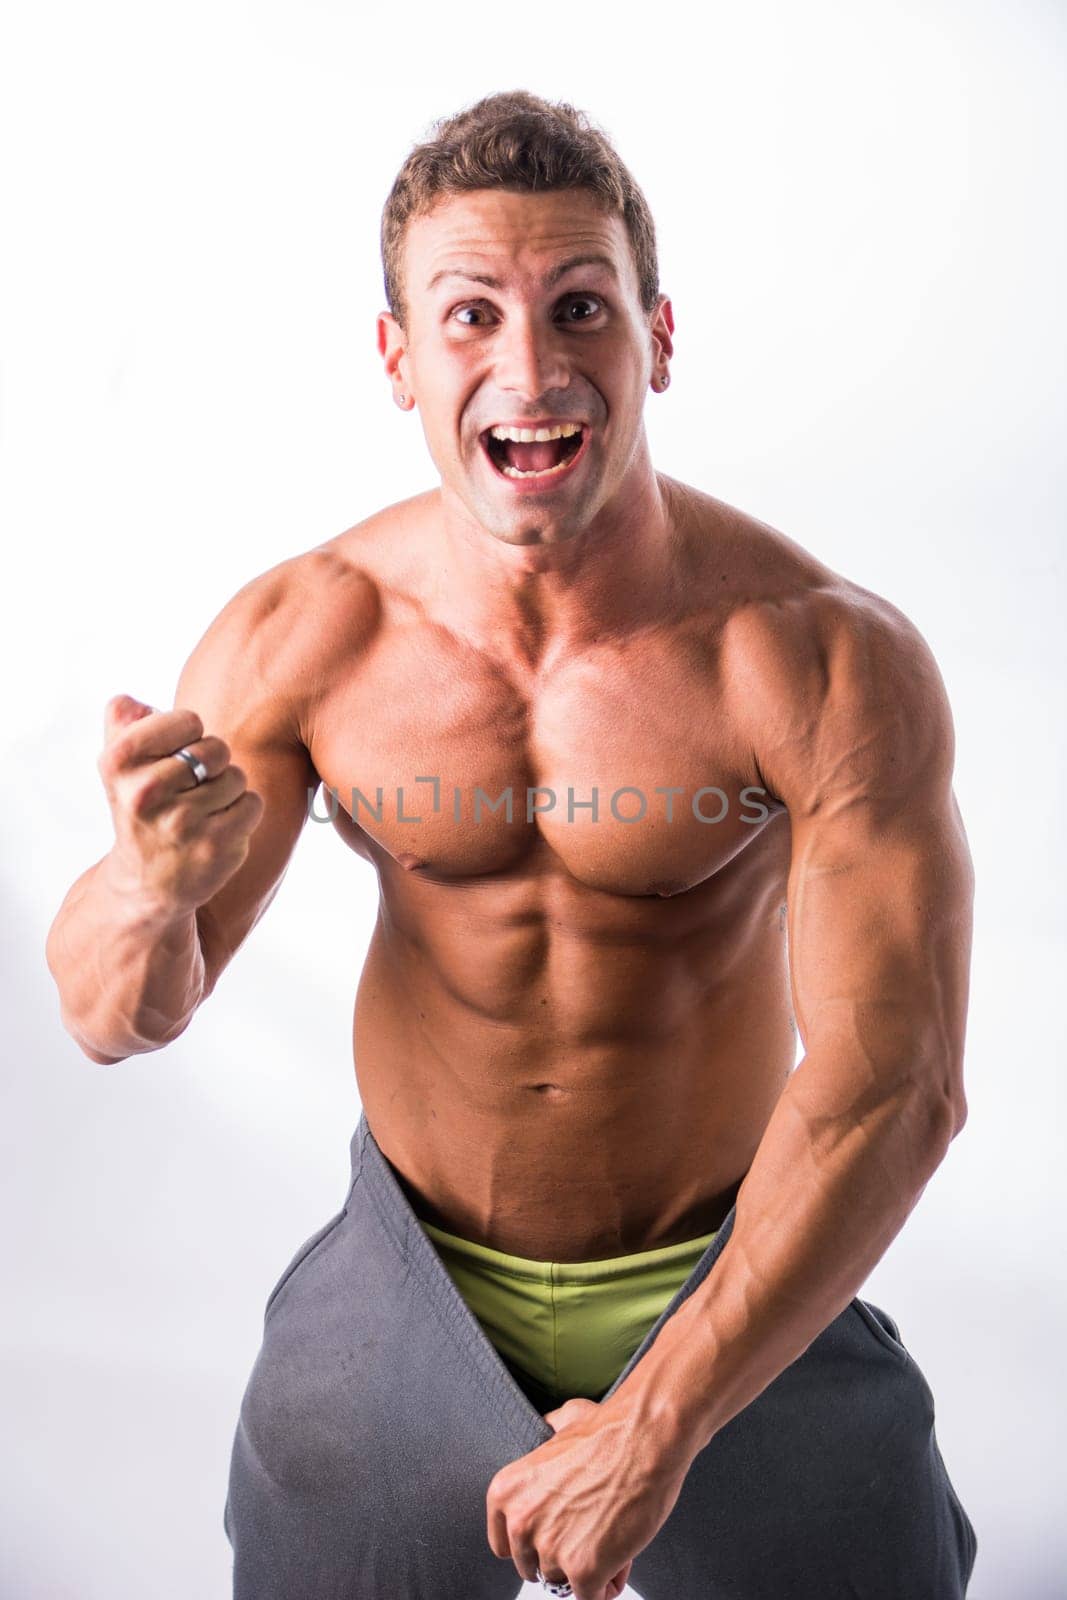 Shirtless Male Bodybuilder Has Lost Weight, Wearing Large Pants, happy expression, in studio